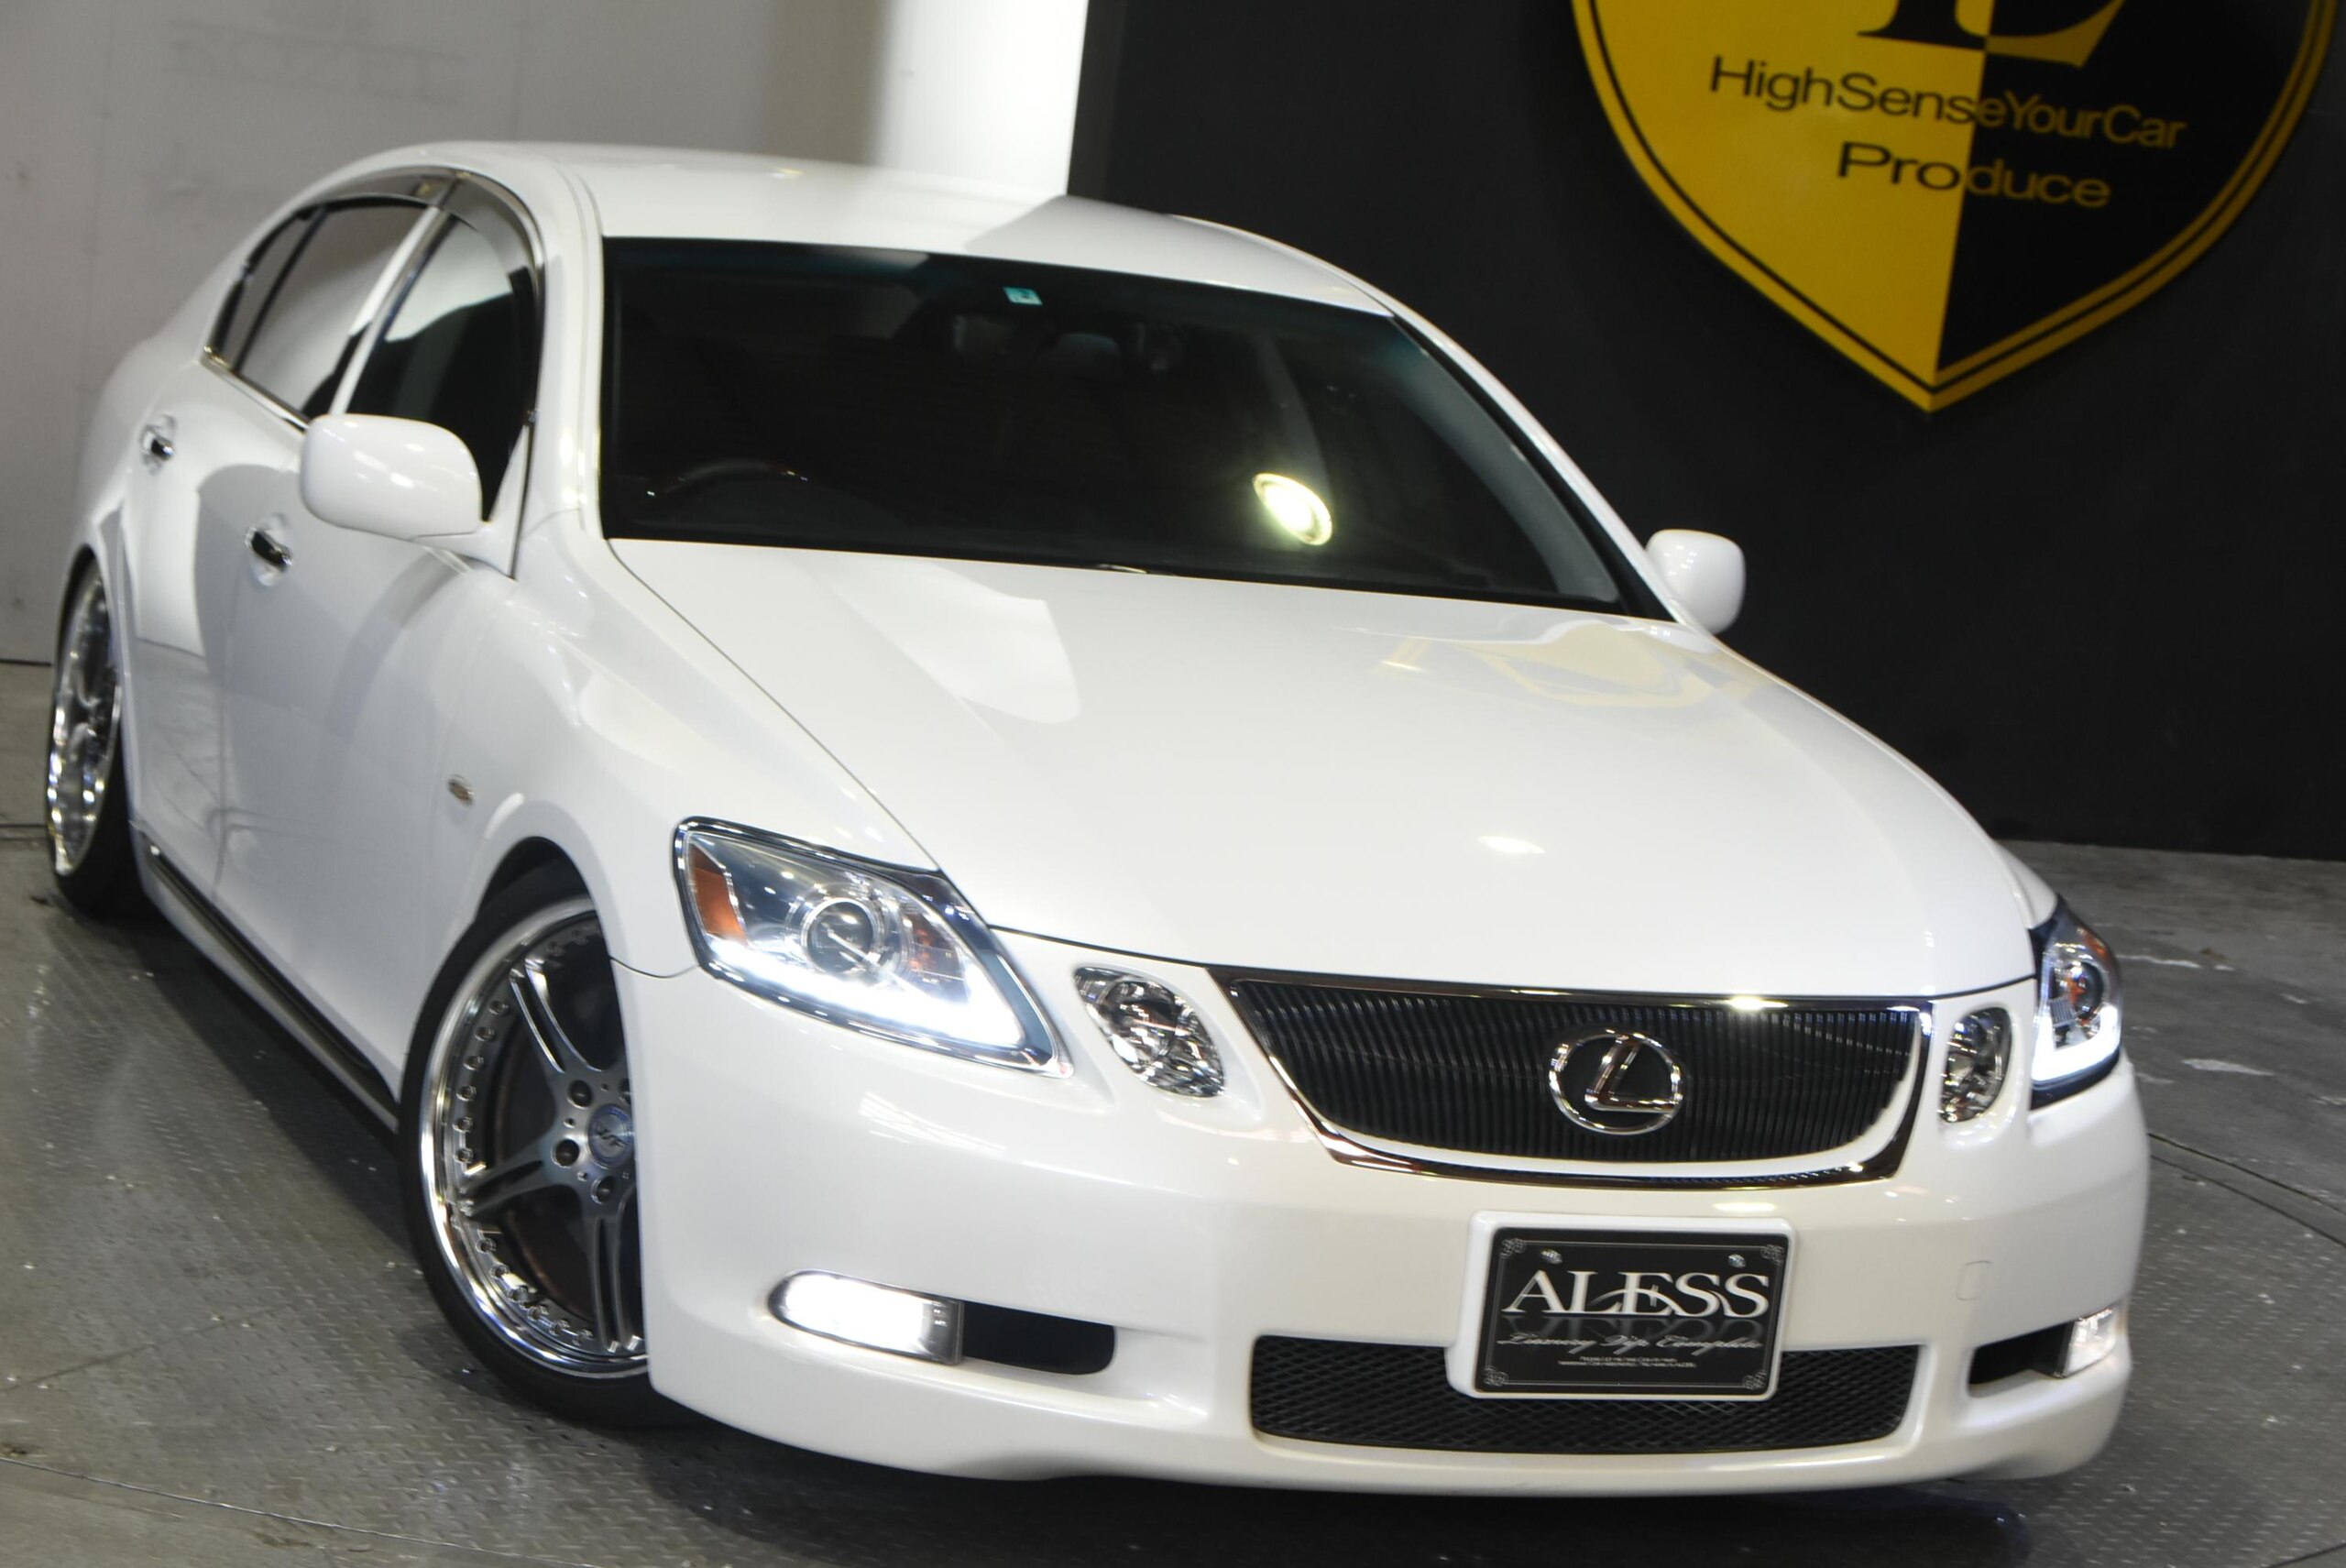 Used LEXUS GS 2006 CFJ8797881 in good condition for sale